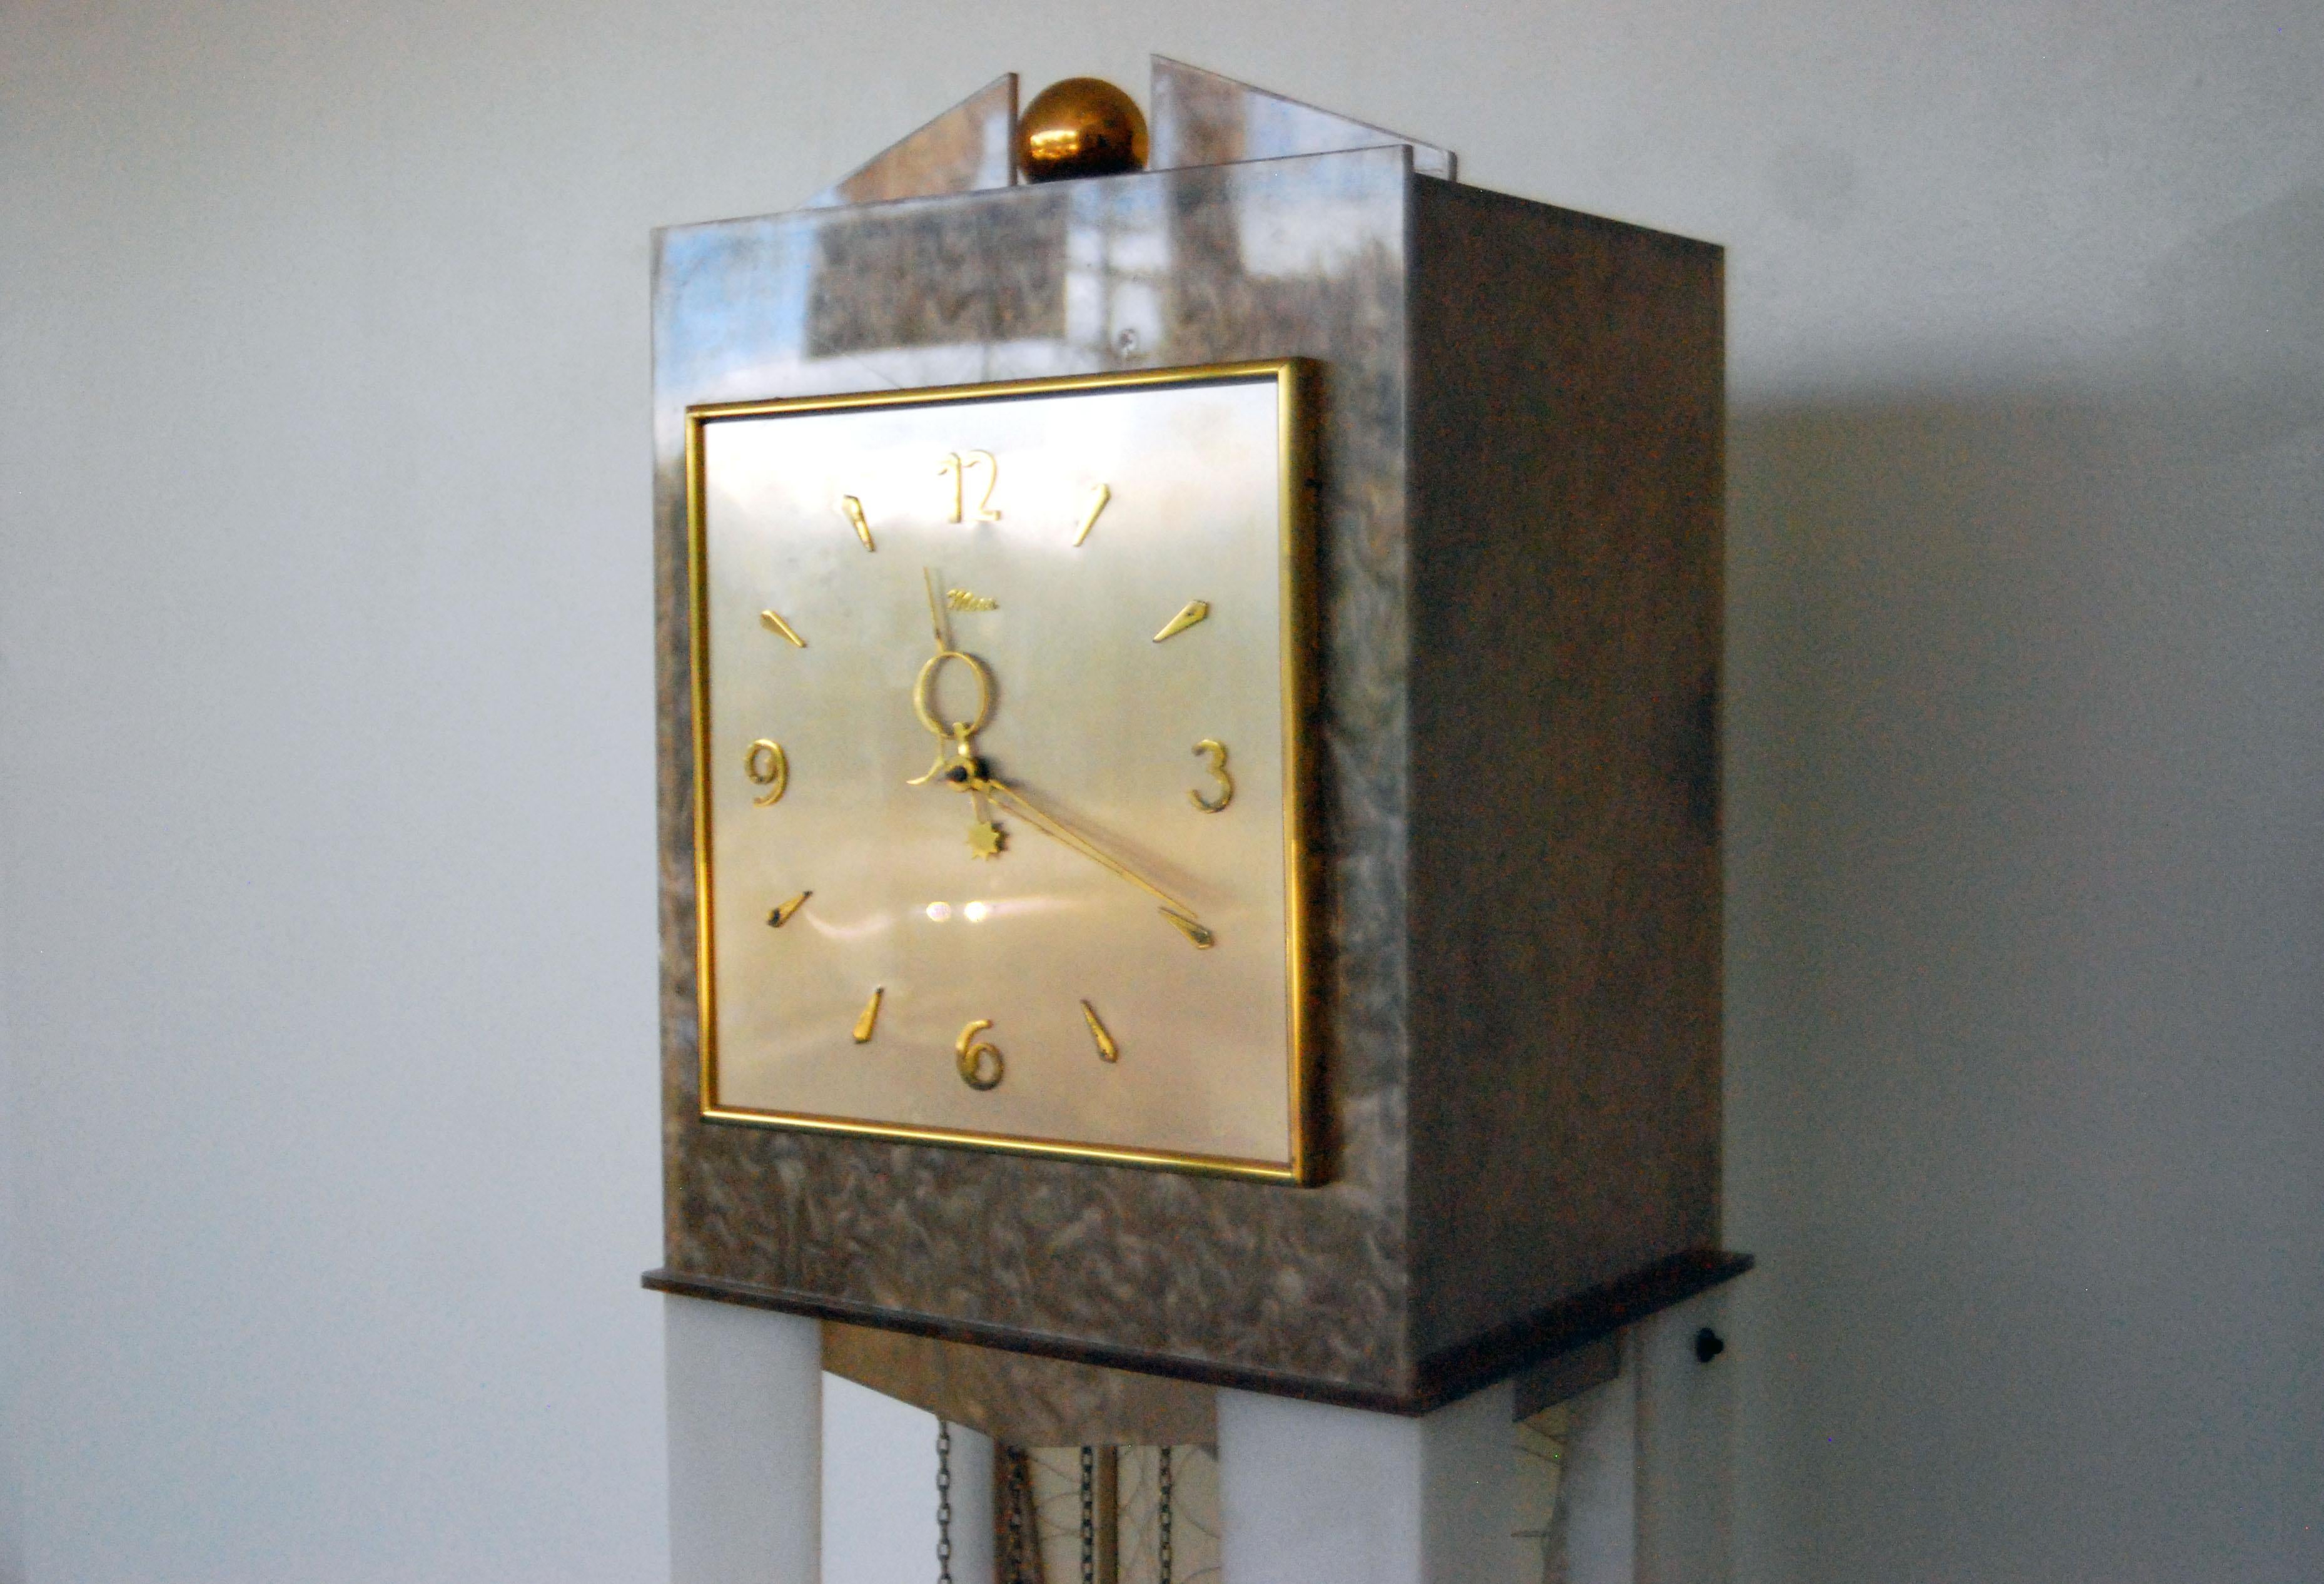 Designer: Moss
Manufacture: Moss 
Period/style: Mid-Century Modern 
Country: US 
Date: 1950s.

Working grandfather clock with built in light.